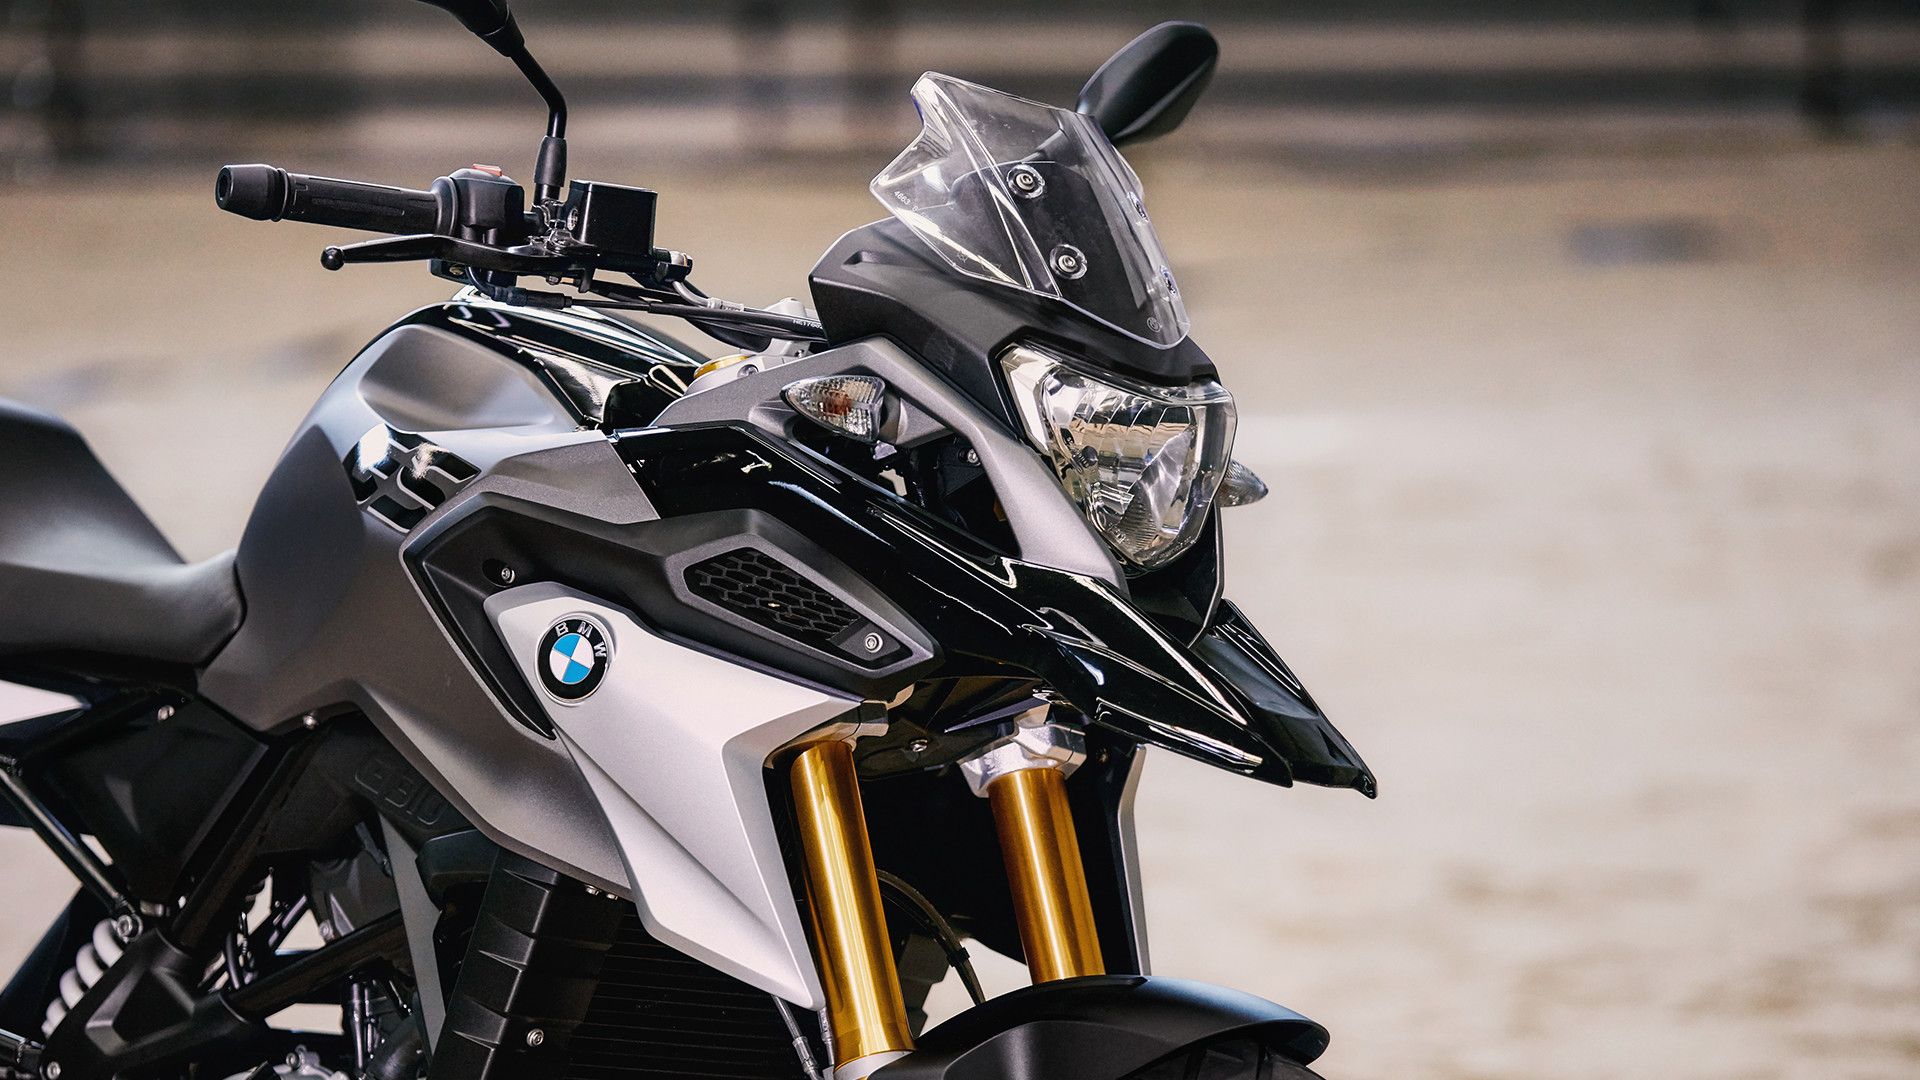 BMW G 310 GS Wallpapers - Wallpaper Cave